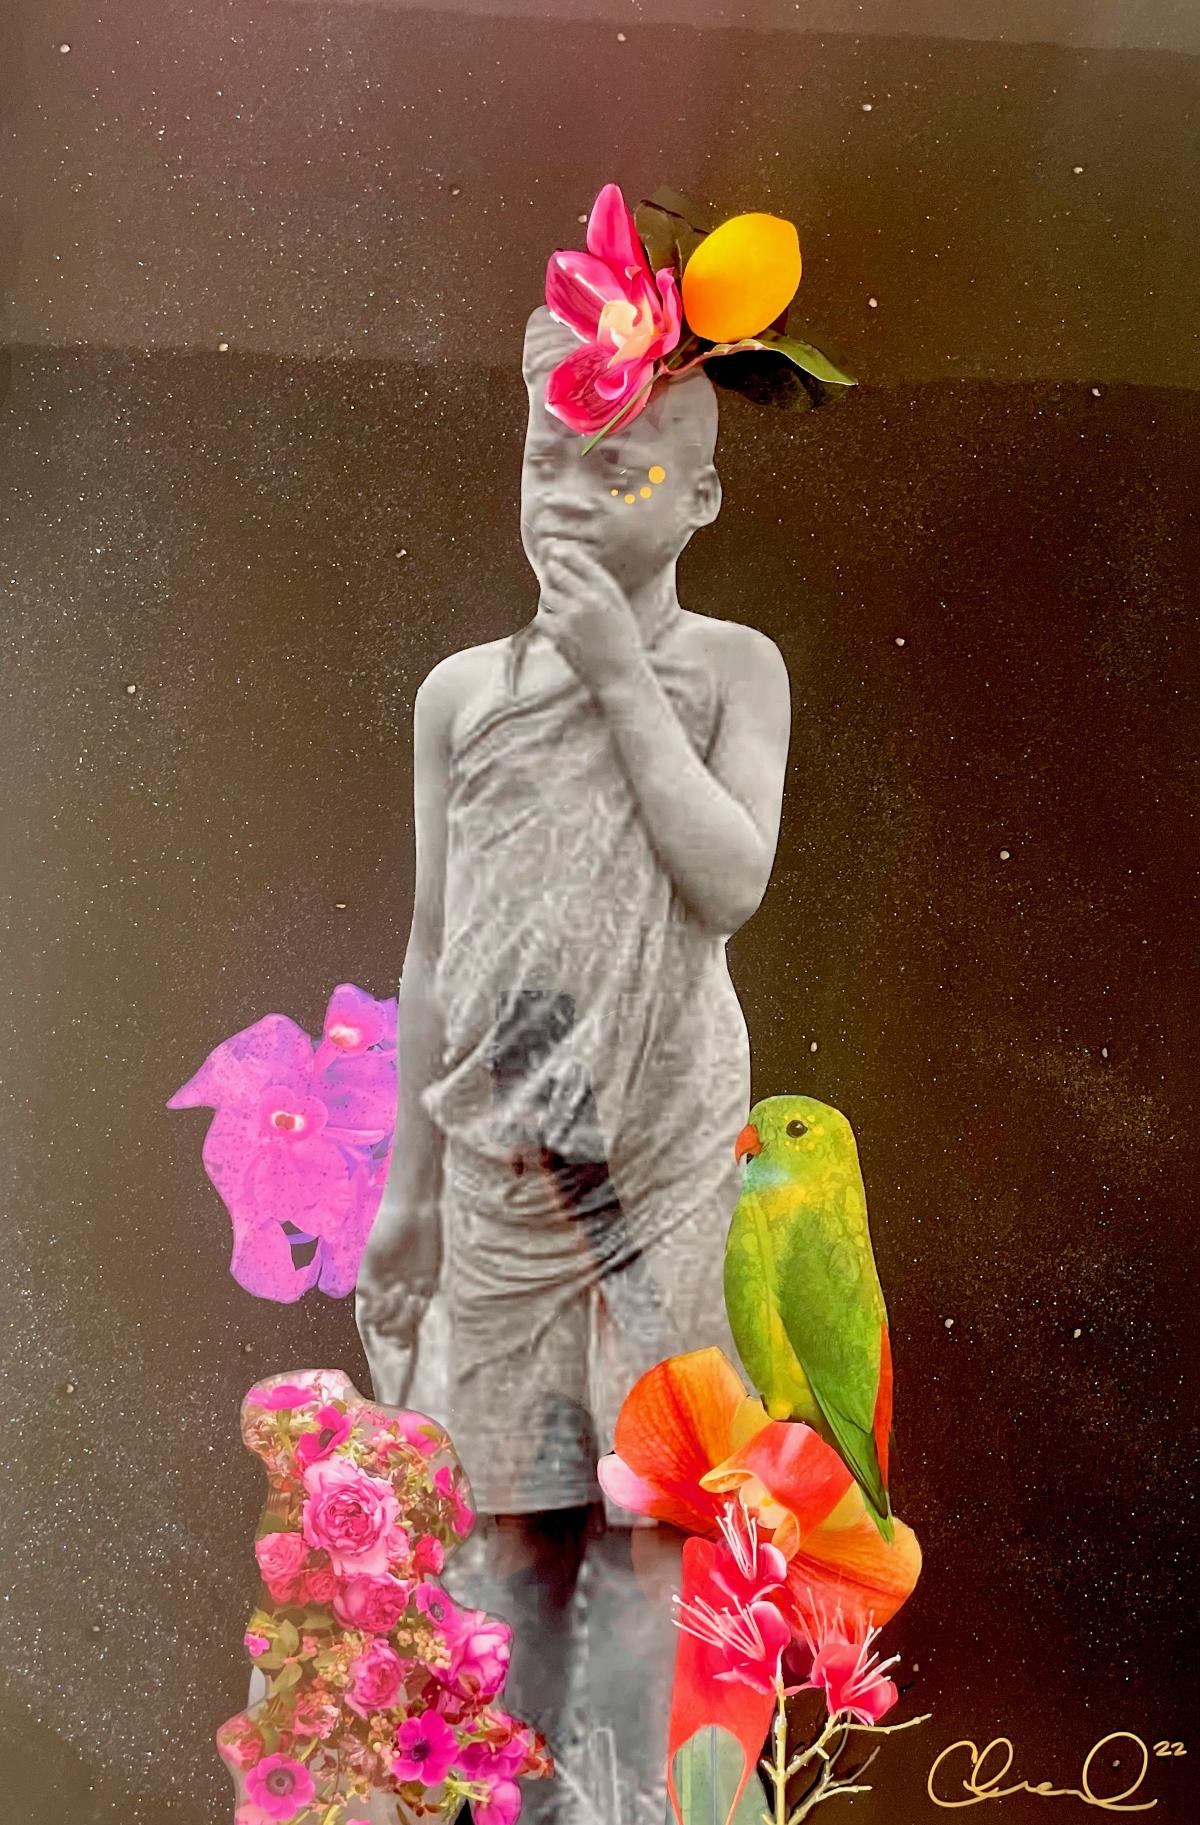 An art piece of floral and animal themed art superimposed on a black and white photo of a young person.